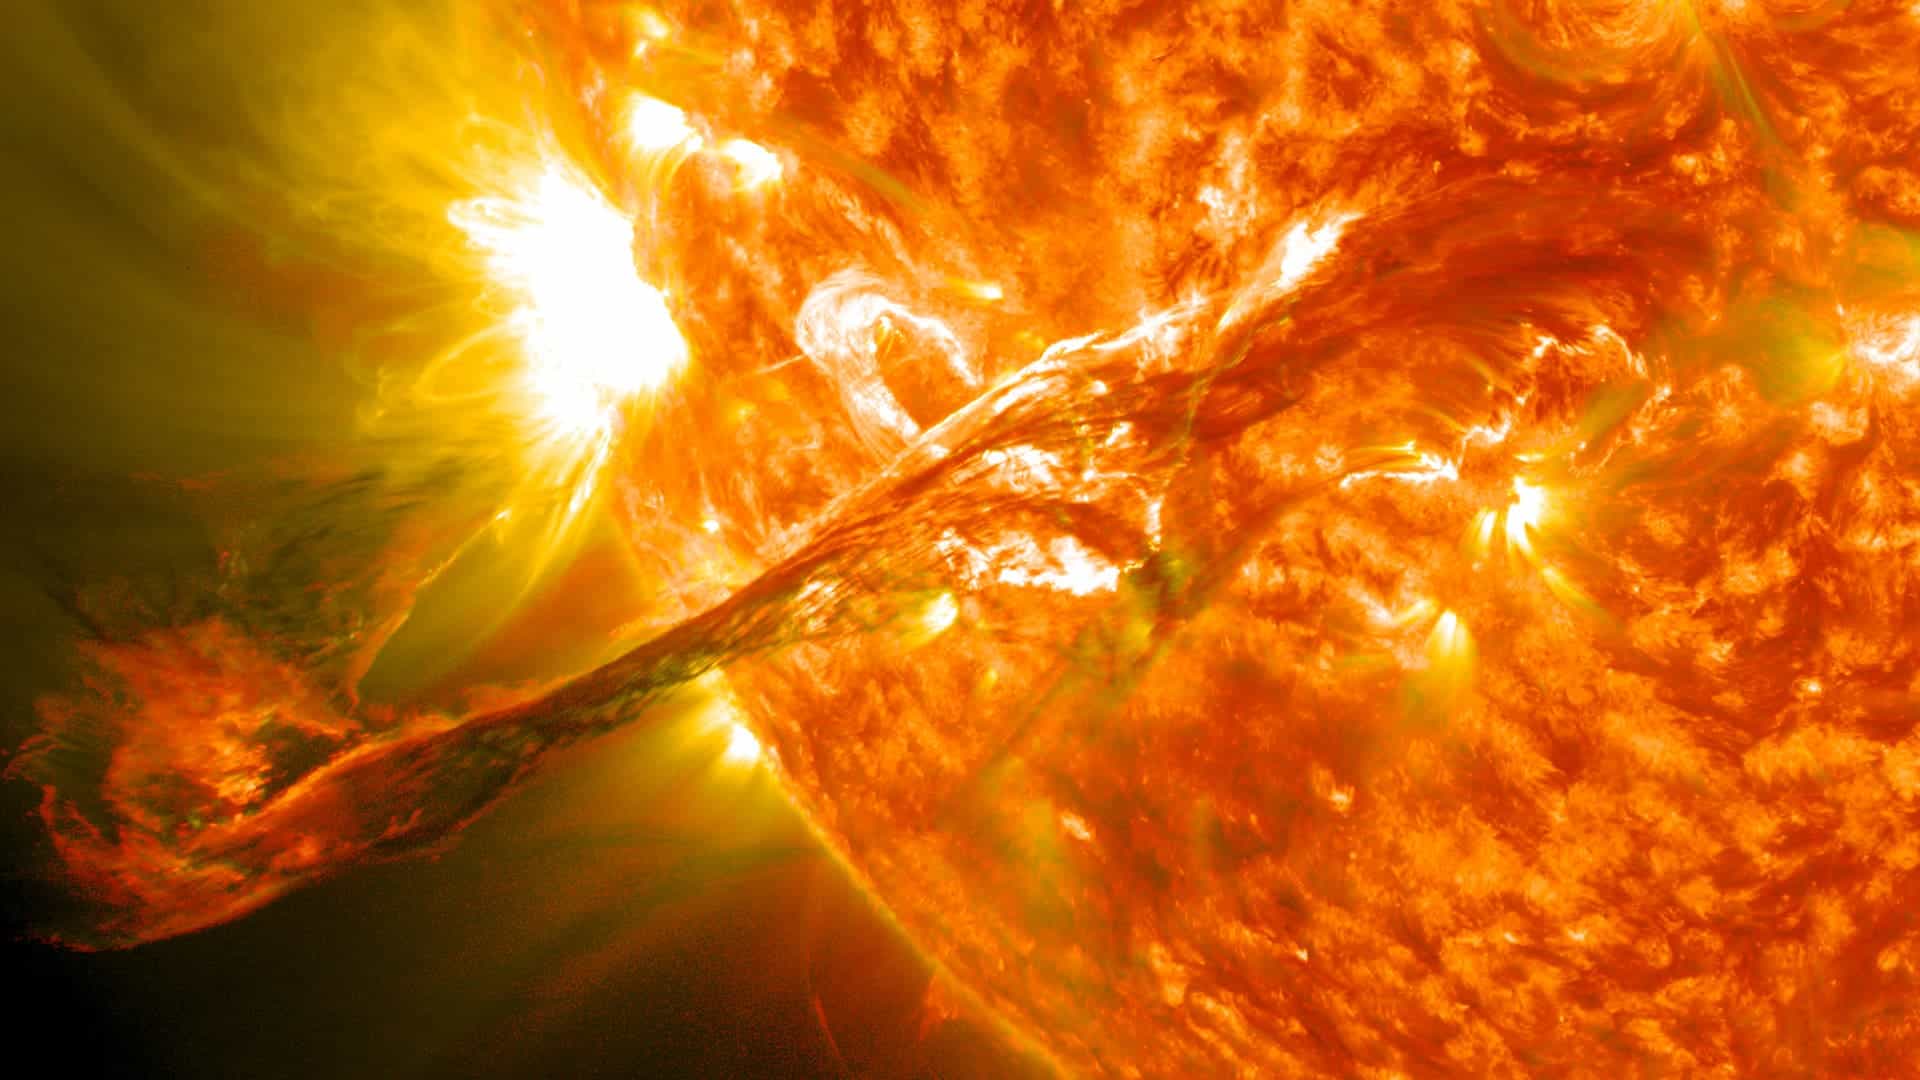 Magnificent coronal mass ejection erupts on the Sun. Credit: Wikimedia Commons.